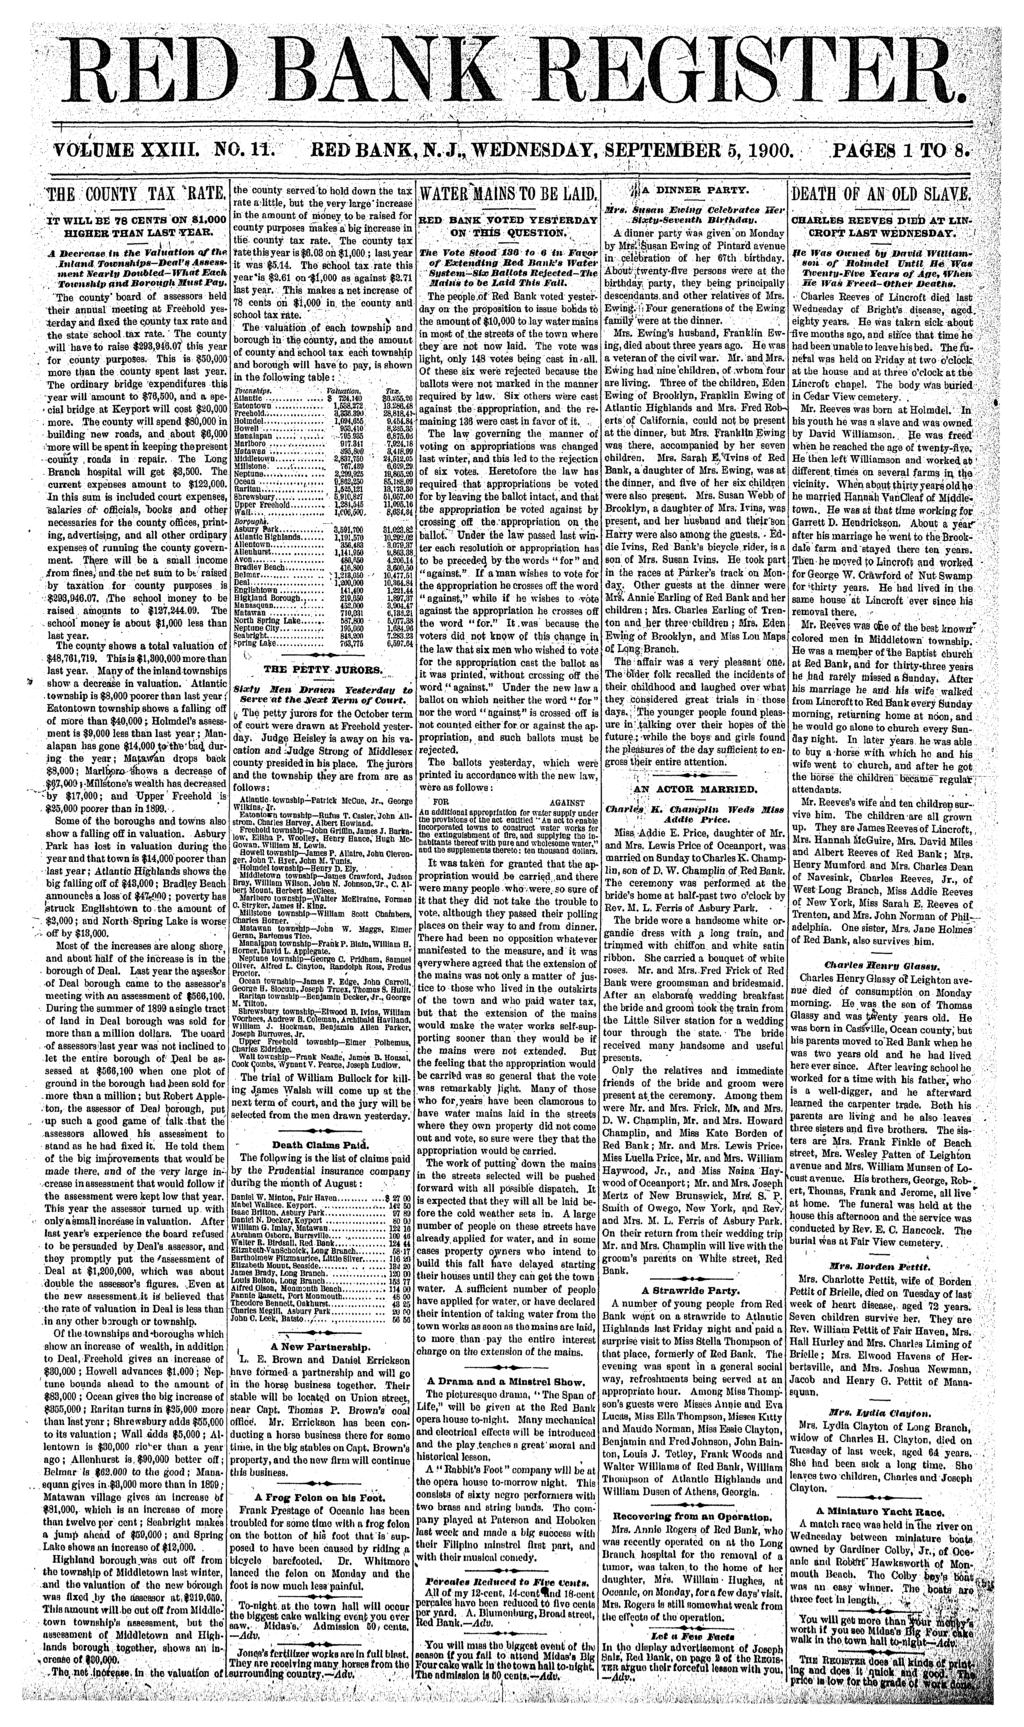 RED BANK VOLUME XX. NO. 11. RED BANK, N. J., WEDNESDA, SEPTEMBER 5, 1900. PAGES 1 TO 8. THE COUNT TAX "RATE. T WLL BE 16 CENTS ON 81.000 HGHER THAN LAST EAR.